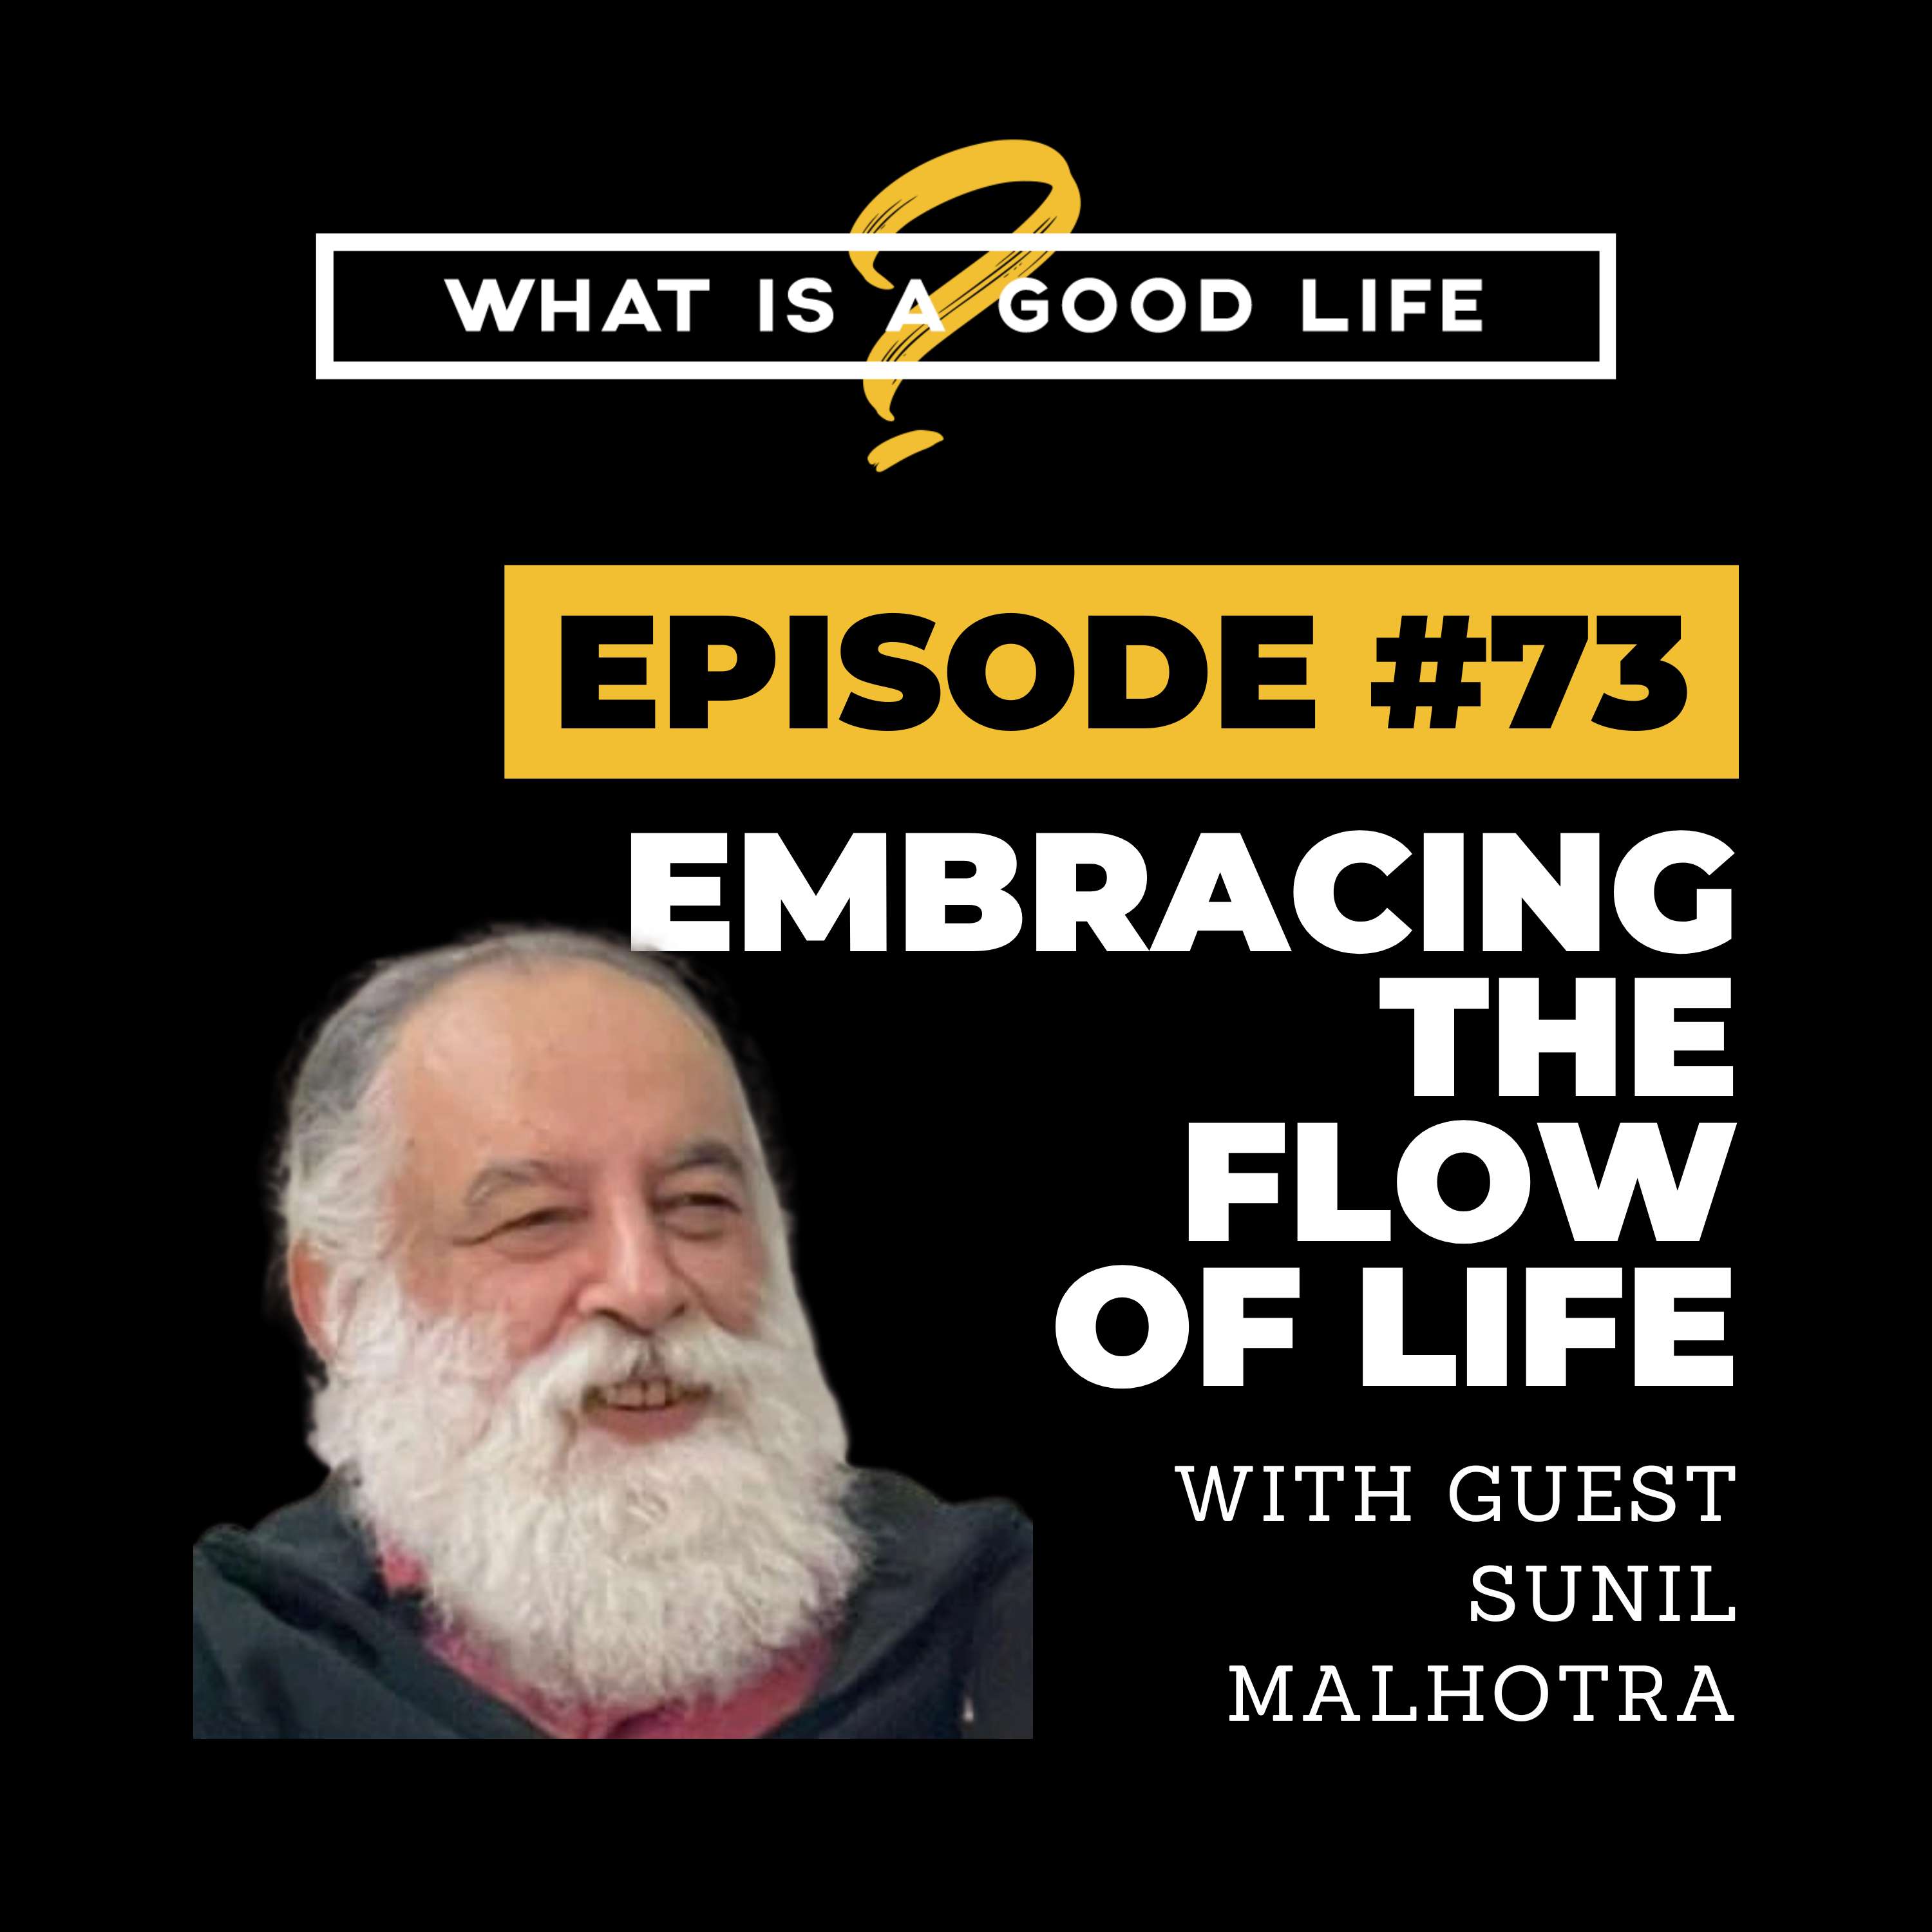 What is a Good Life? #73 - Embracing The Flow Of Life with Sunil Malhotra